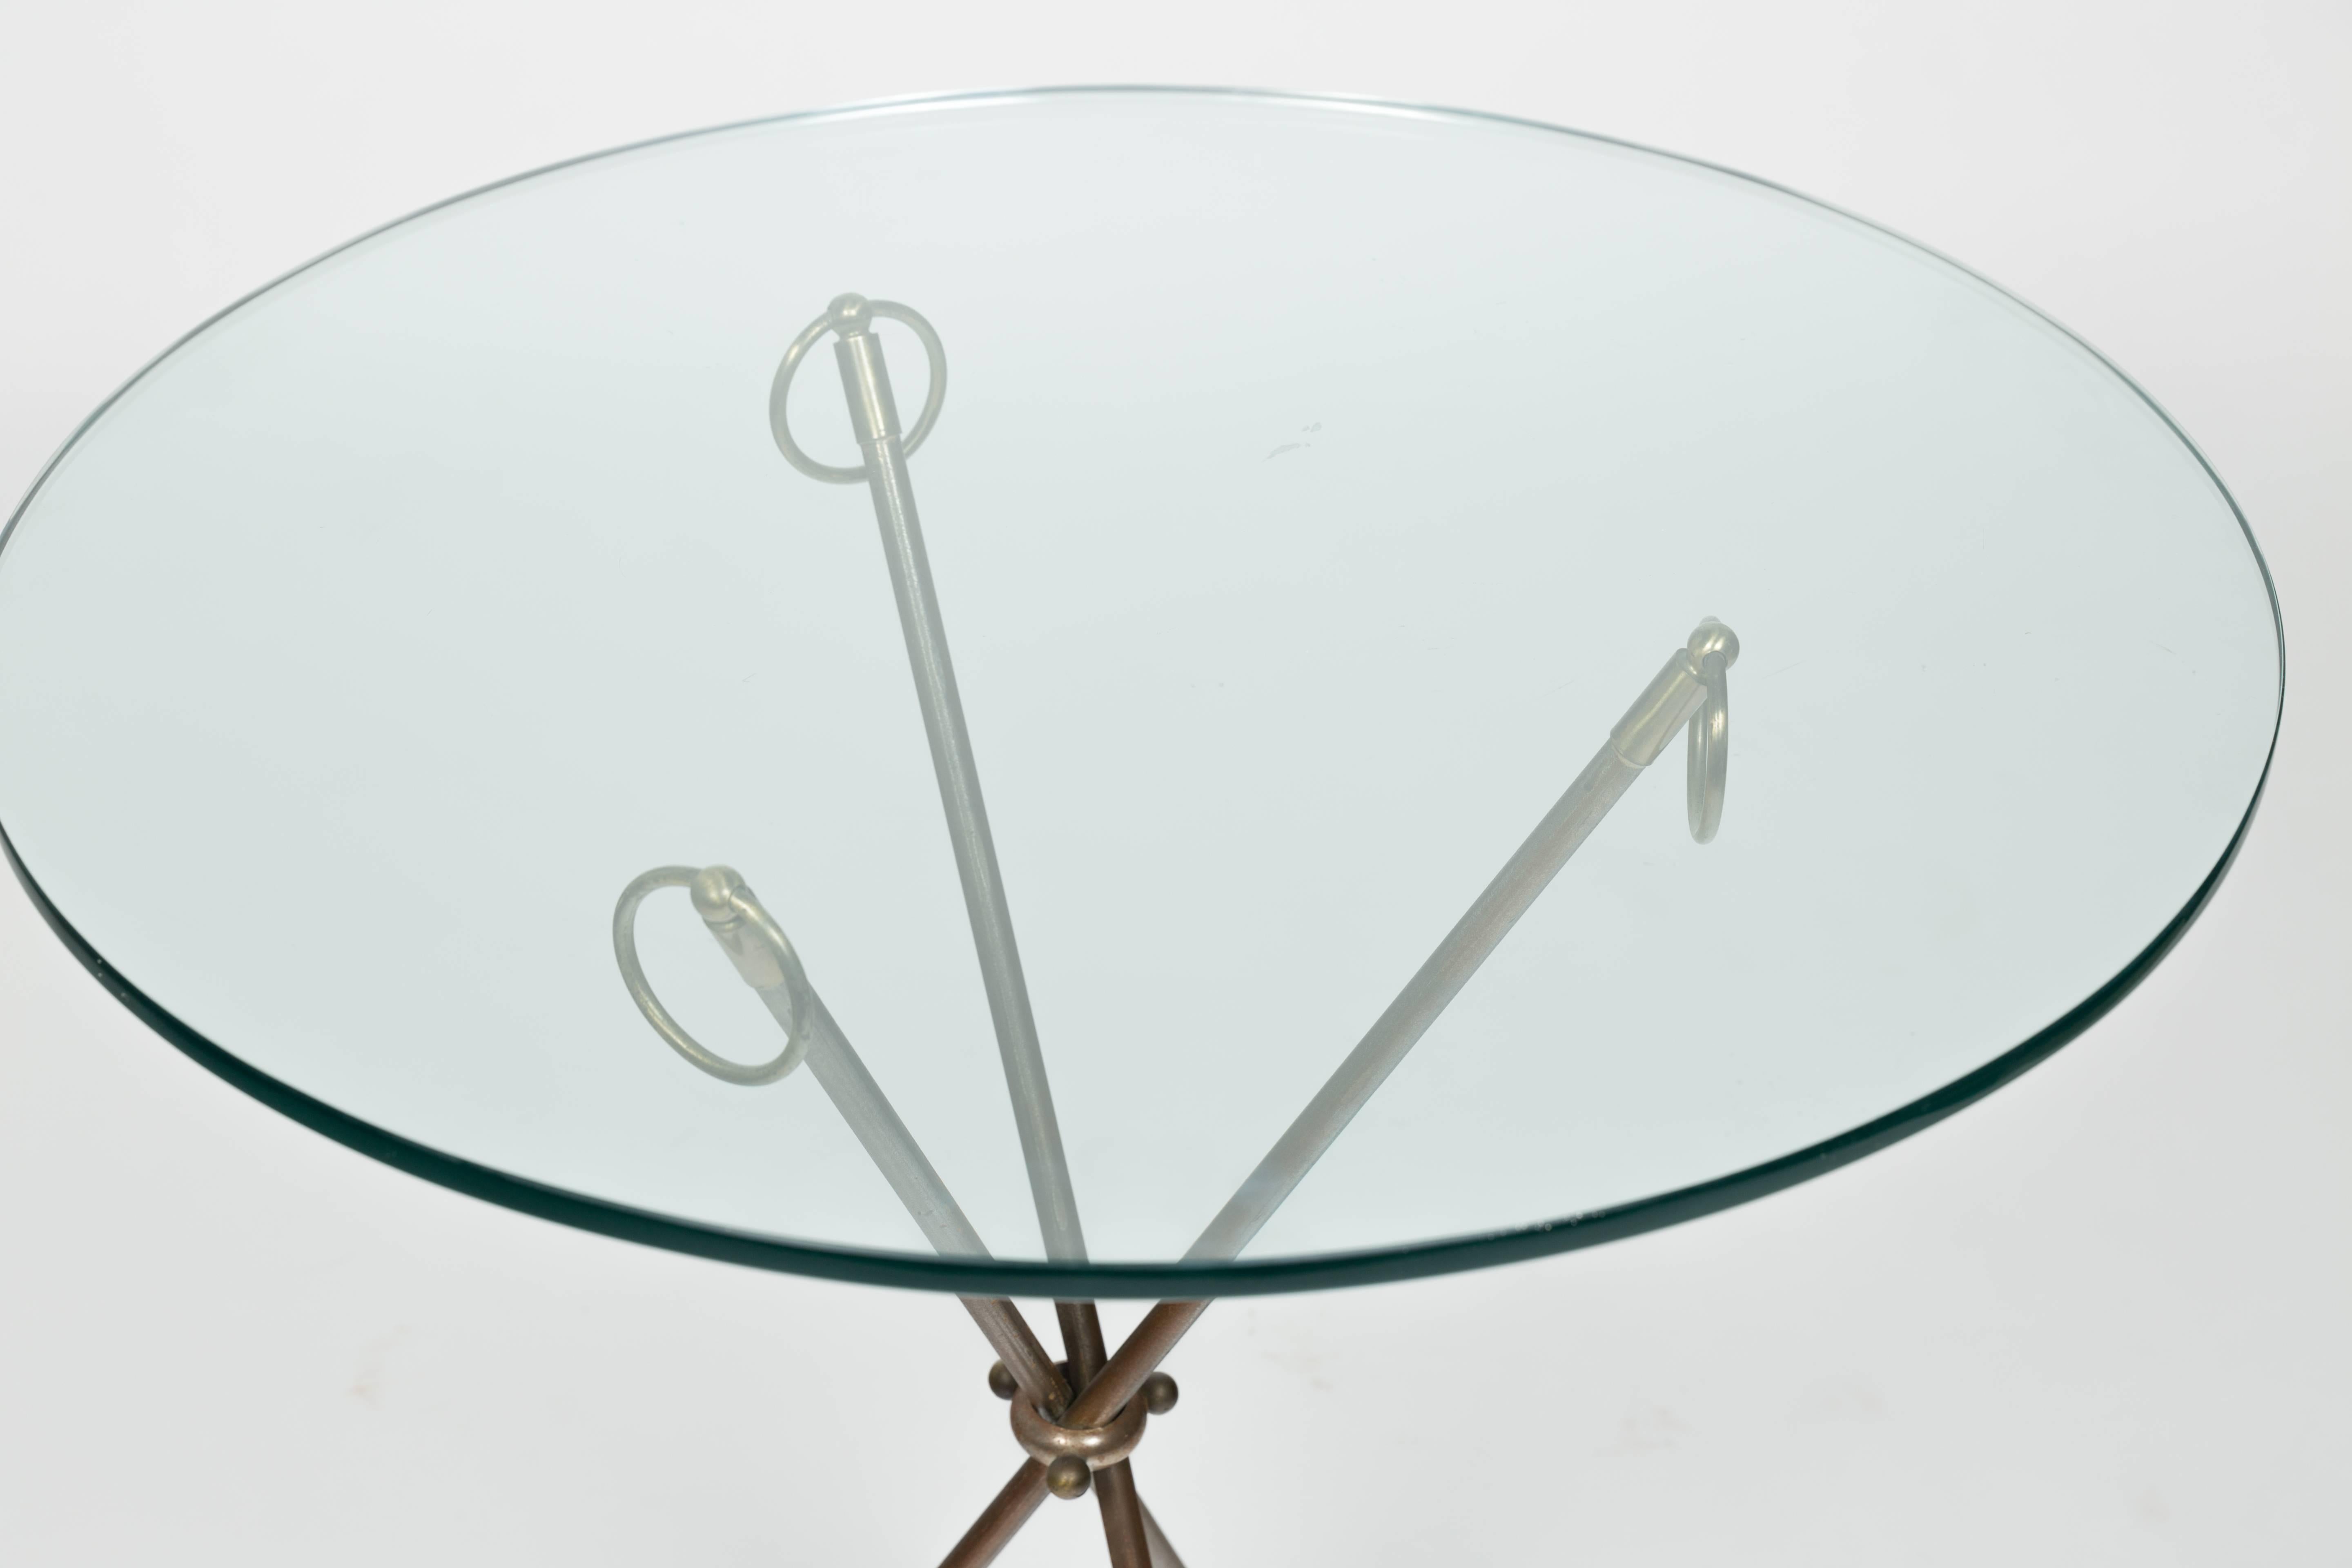 1980s classical glass top tri-pod table from Italy .Base folds up. Bought from Bloomingdales.
 